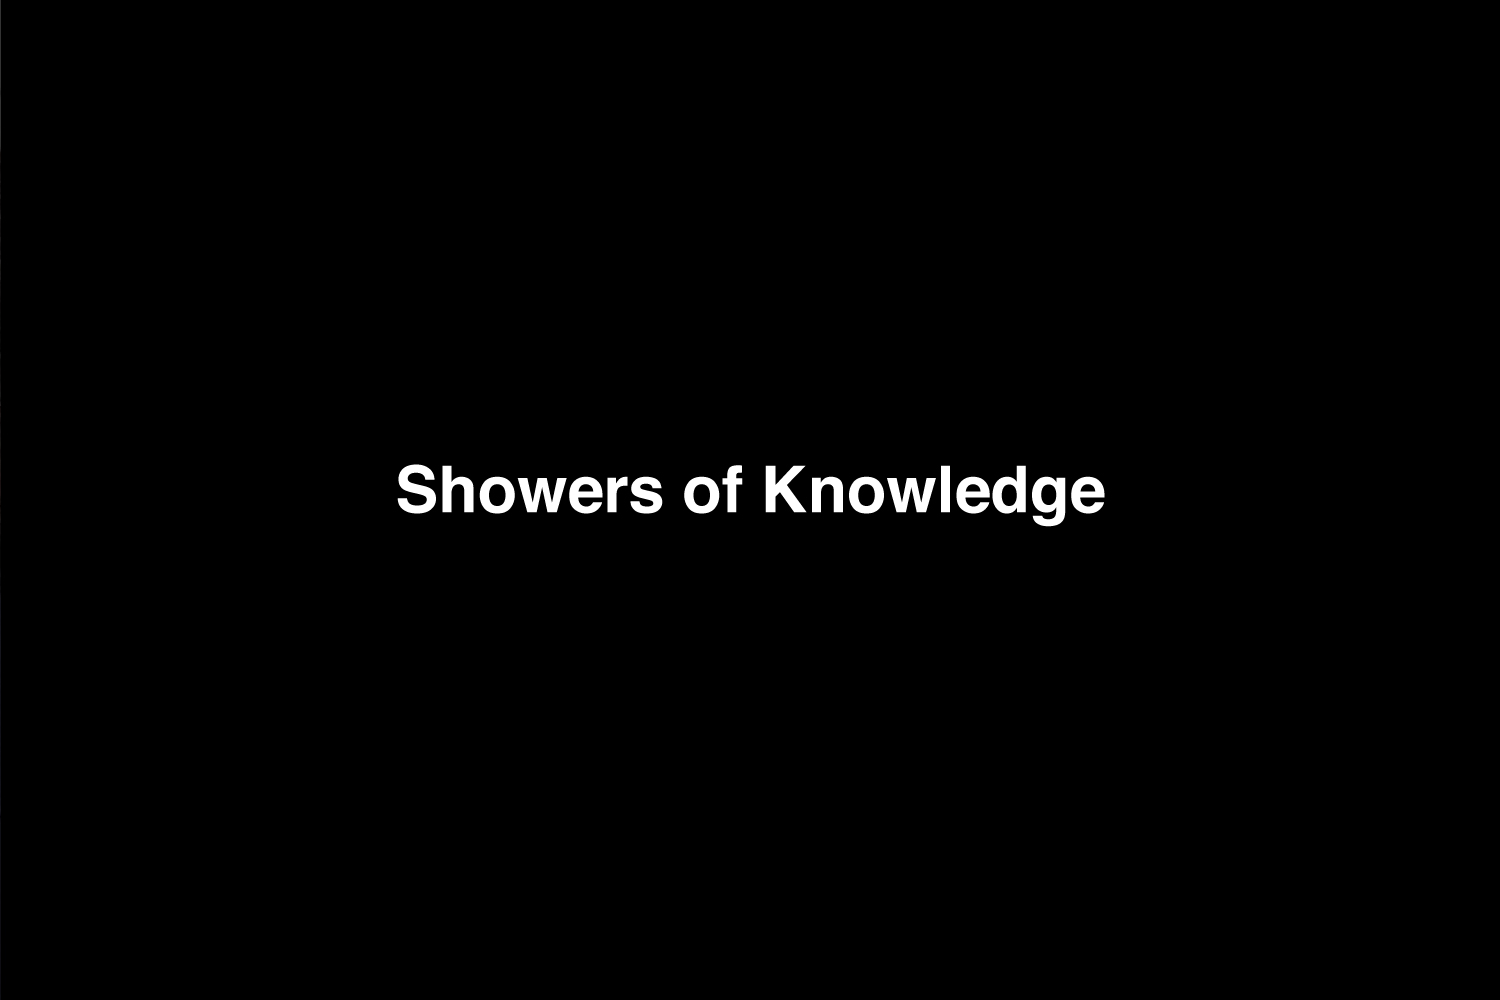 Showers of Knowledge